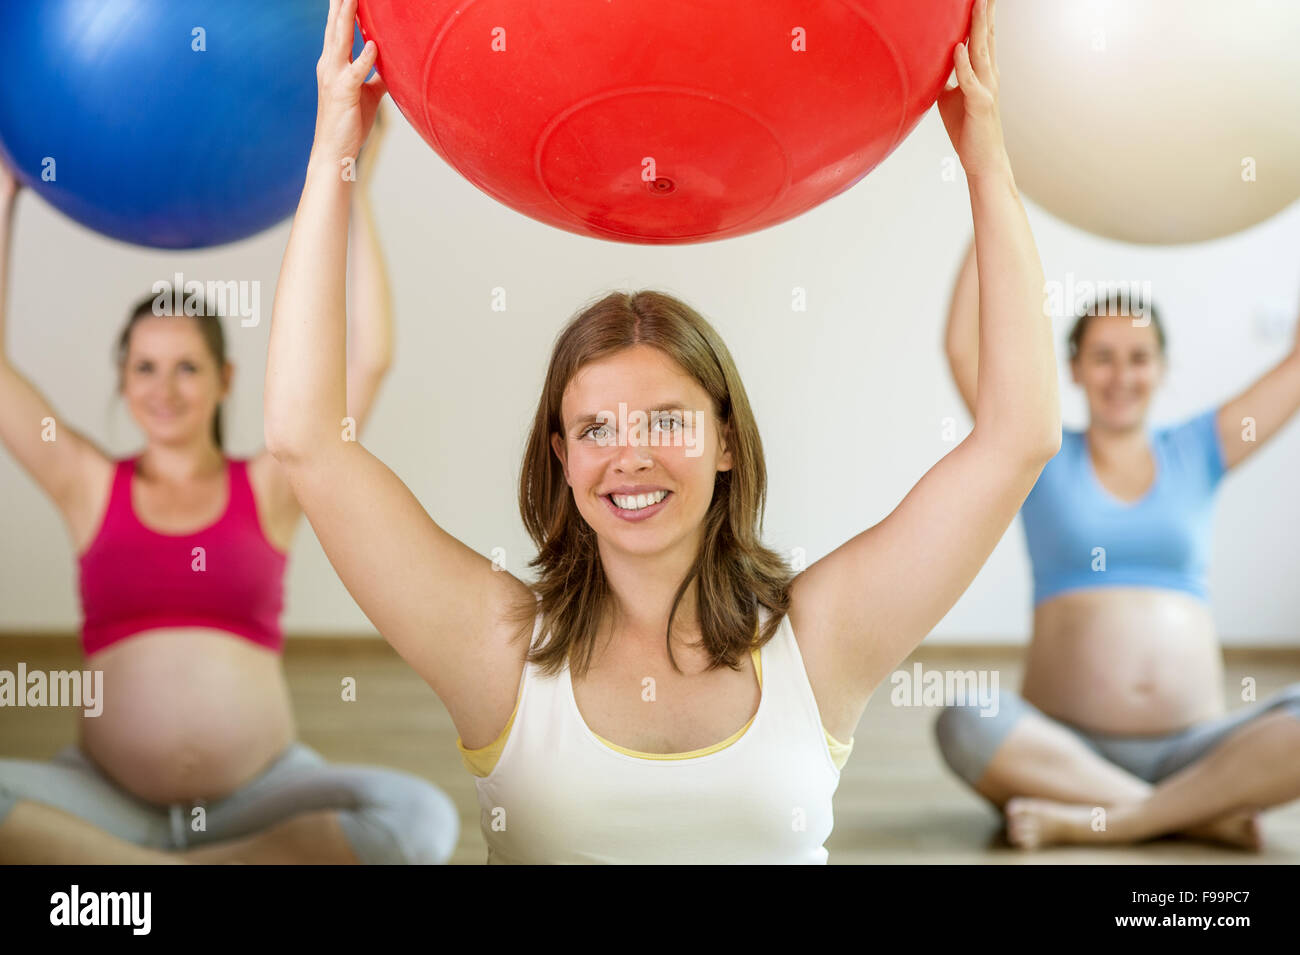 Young pregnant women doing relaxation exercise using a fitness ball Stock Photo